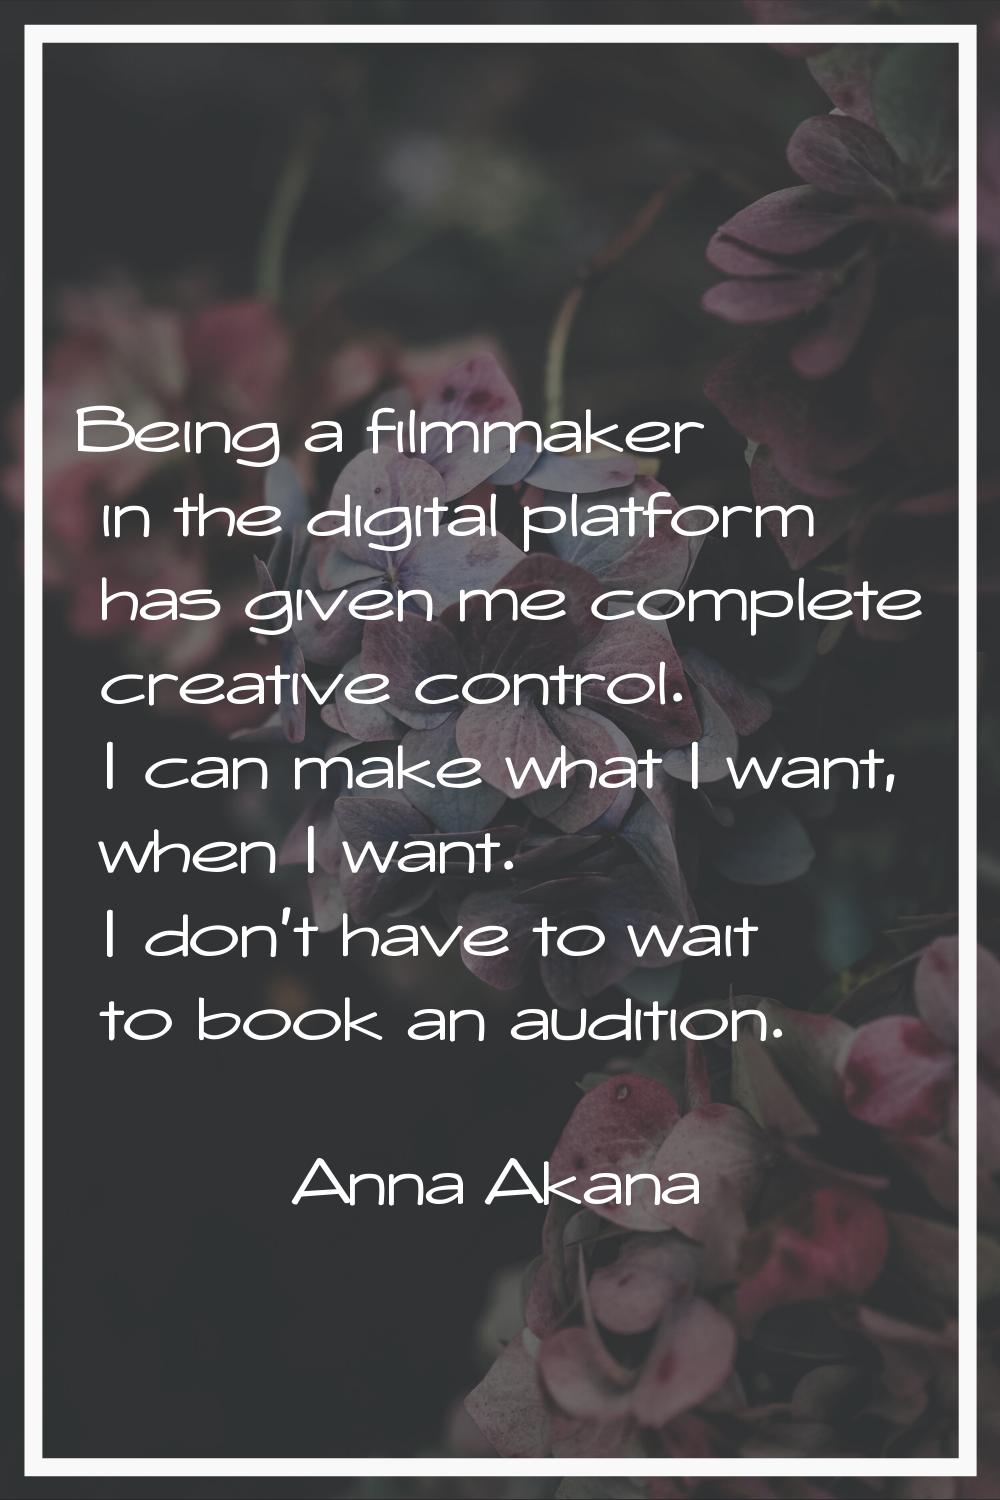 Being a filmmaker in the digital platform has given me complete creative control. I can make what I